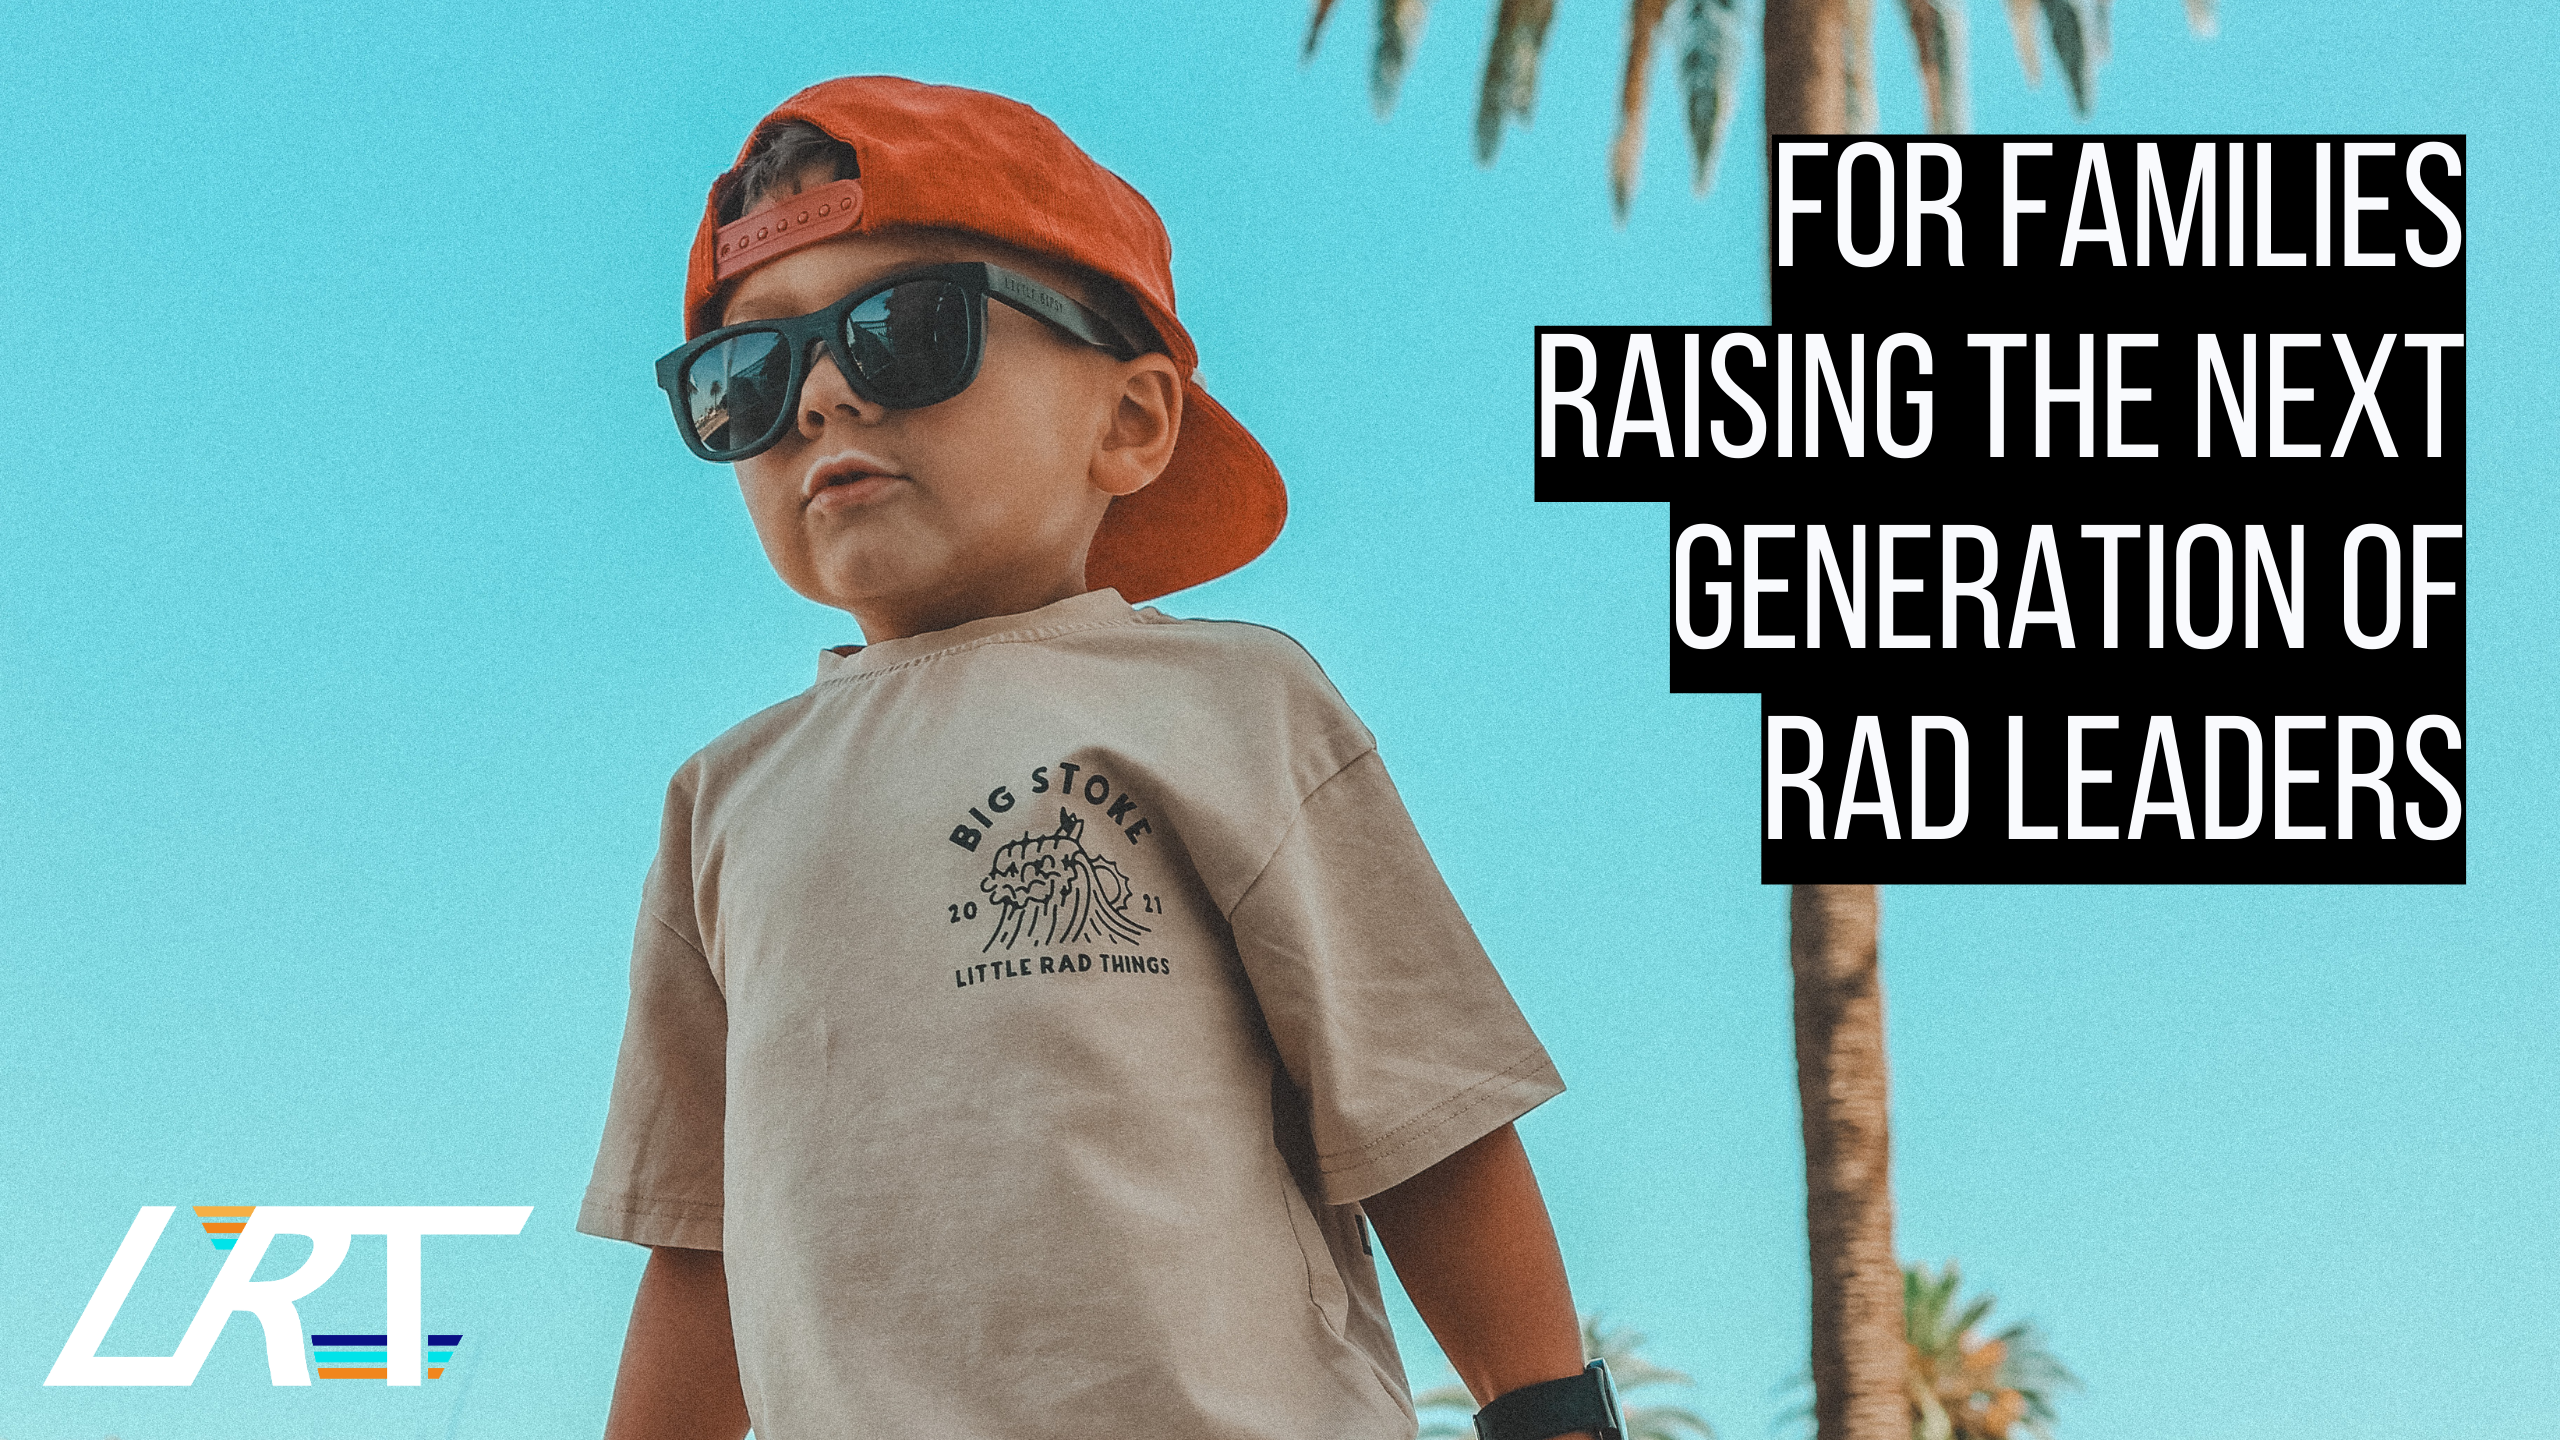 LRT - Infant, Toddler, and Youth Apparel. Free US Shipping Over $75. Little Rad Things.